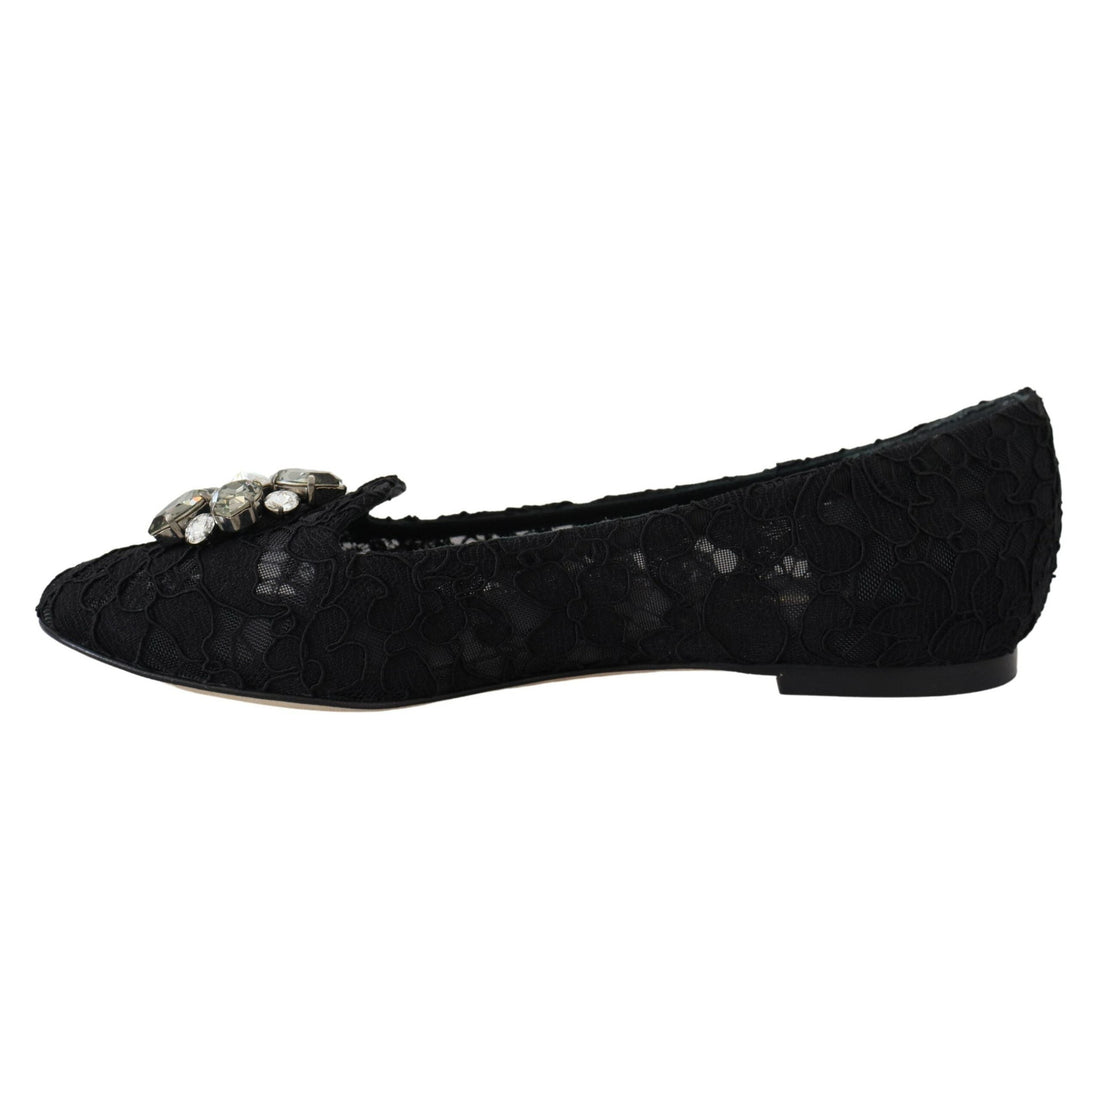 Dolce & Gabbana Elegant Floral Lace Flat Vally Shoes